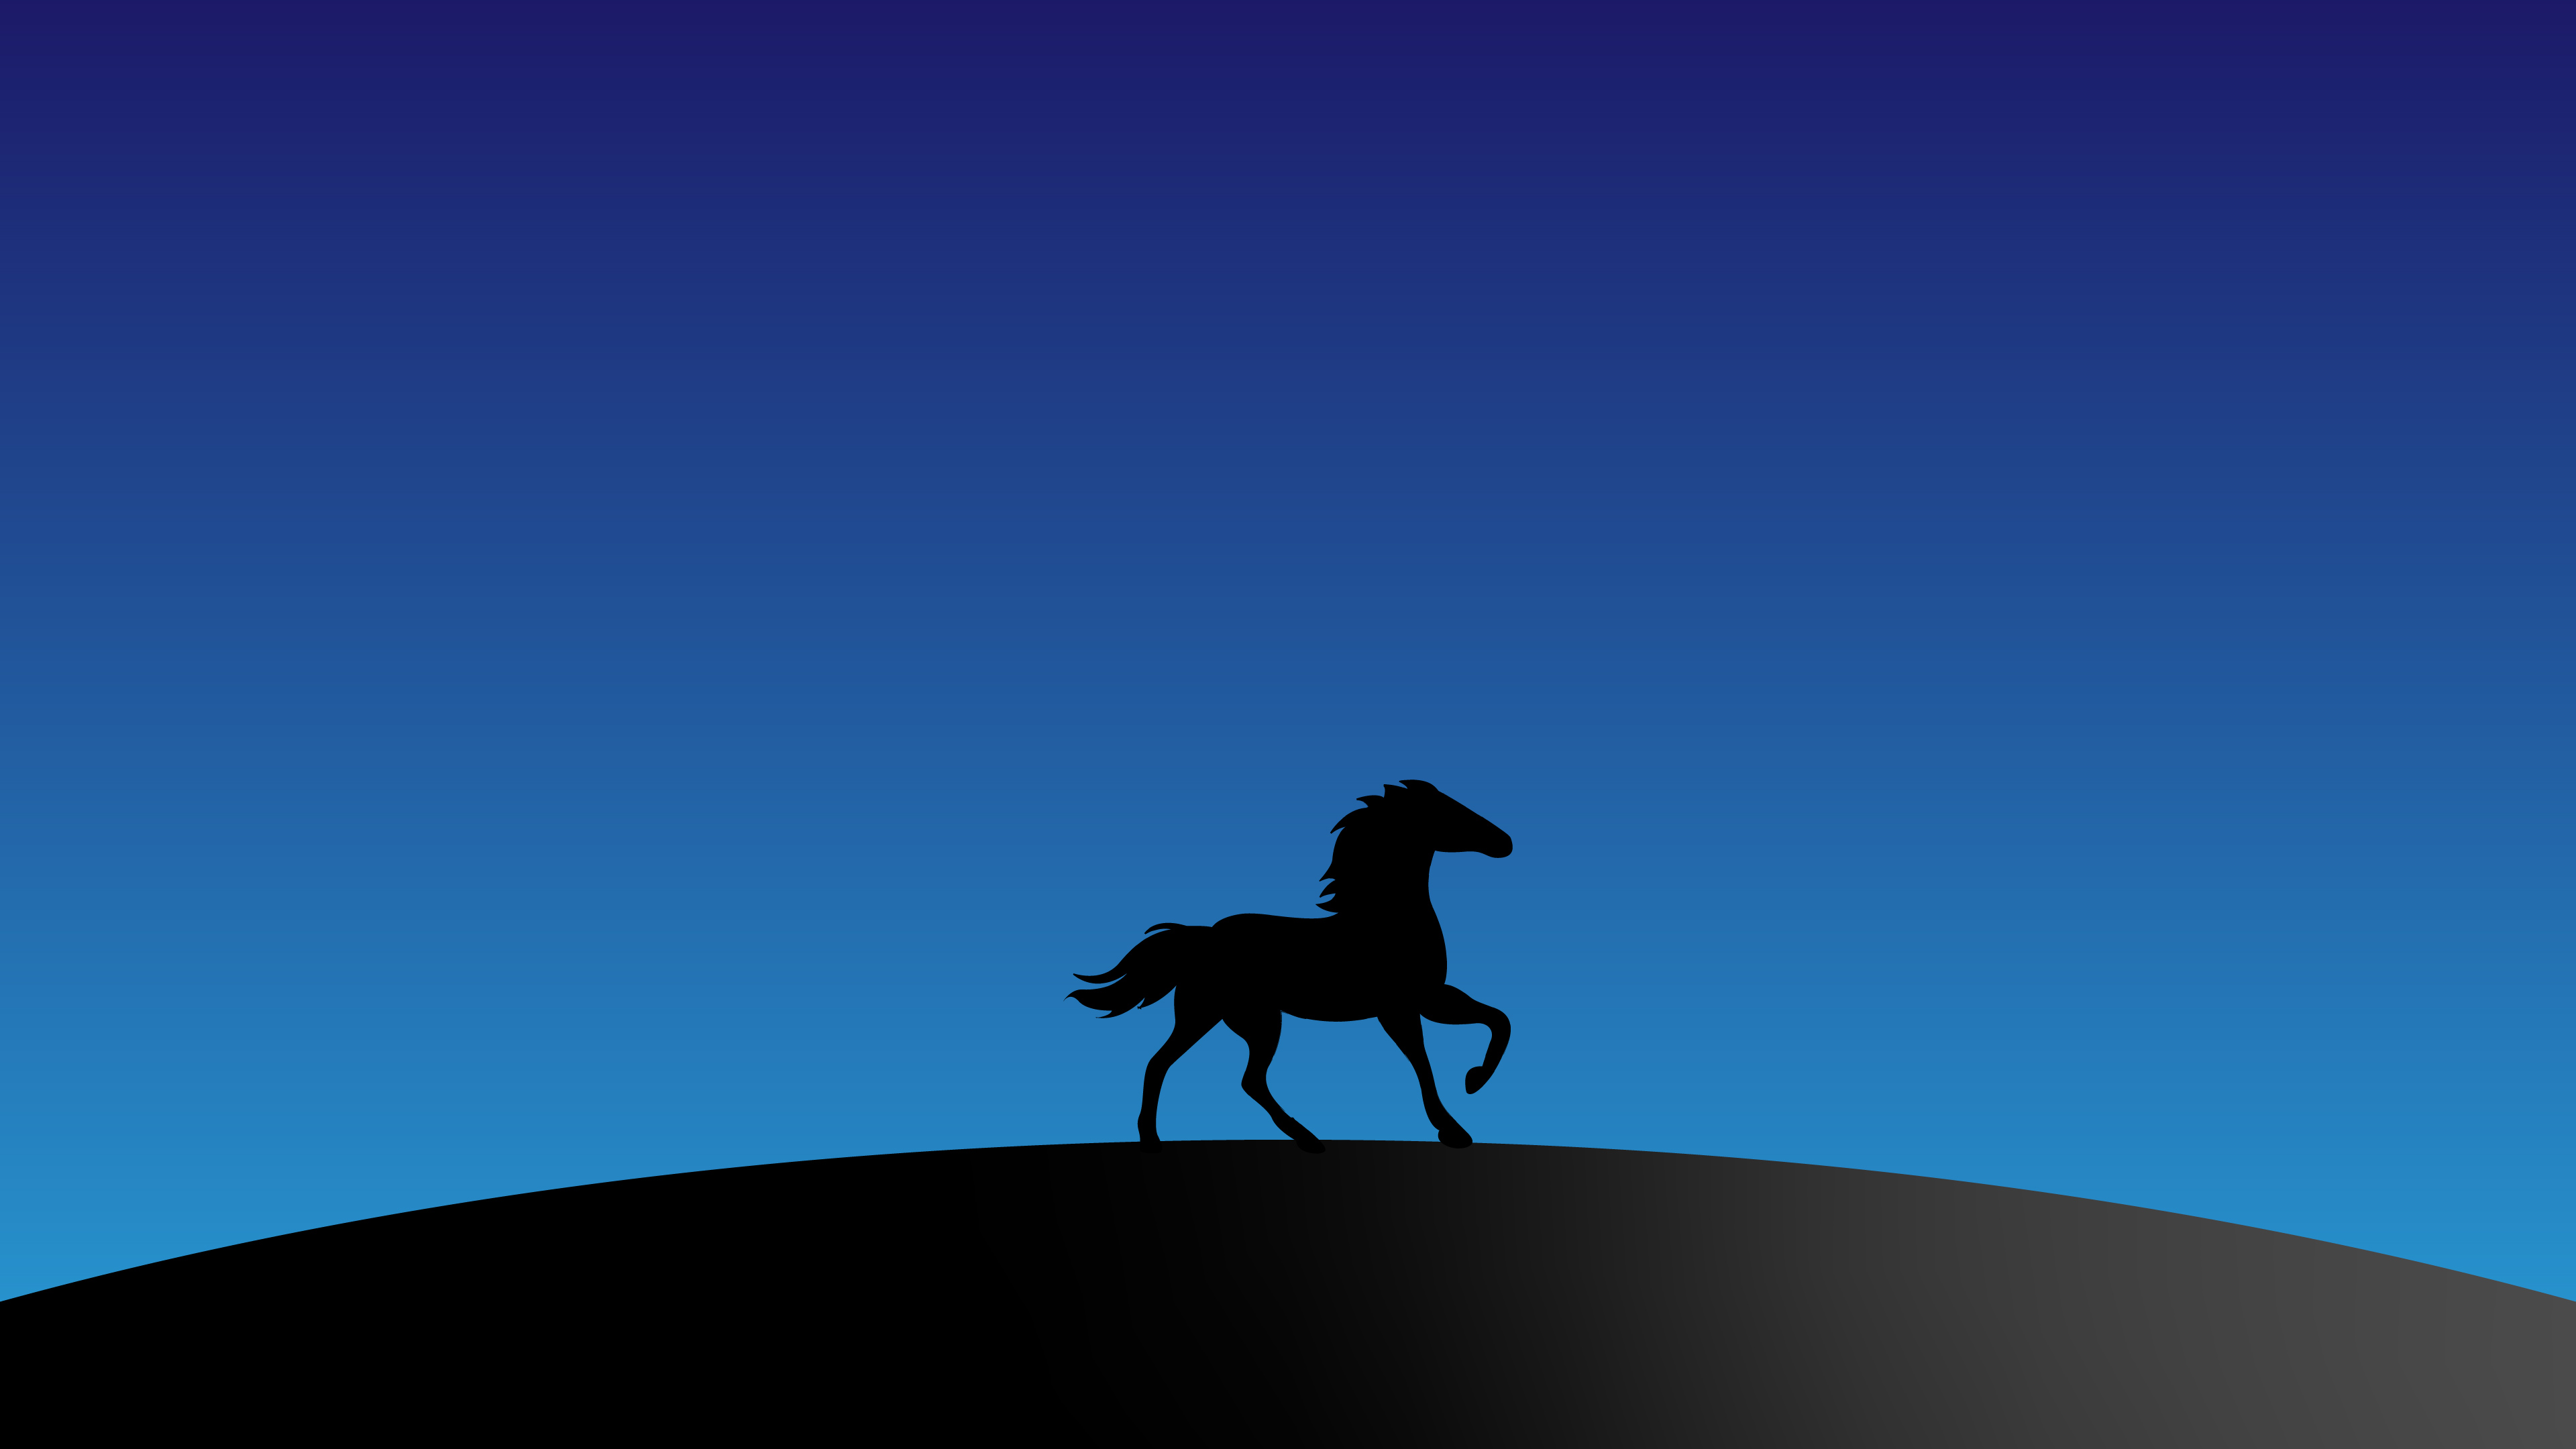 Wallpapers horse silhouette minimalism on the desktop